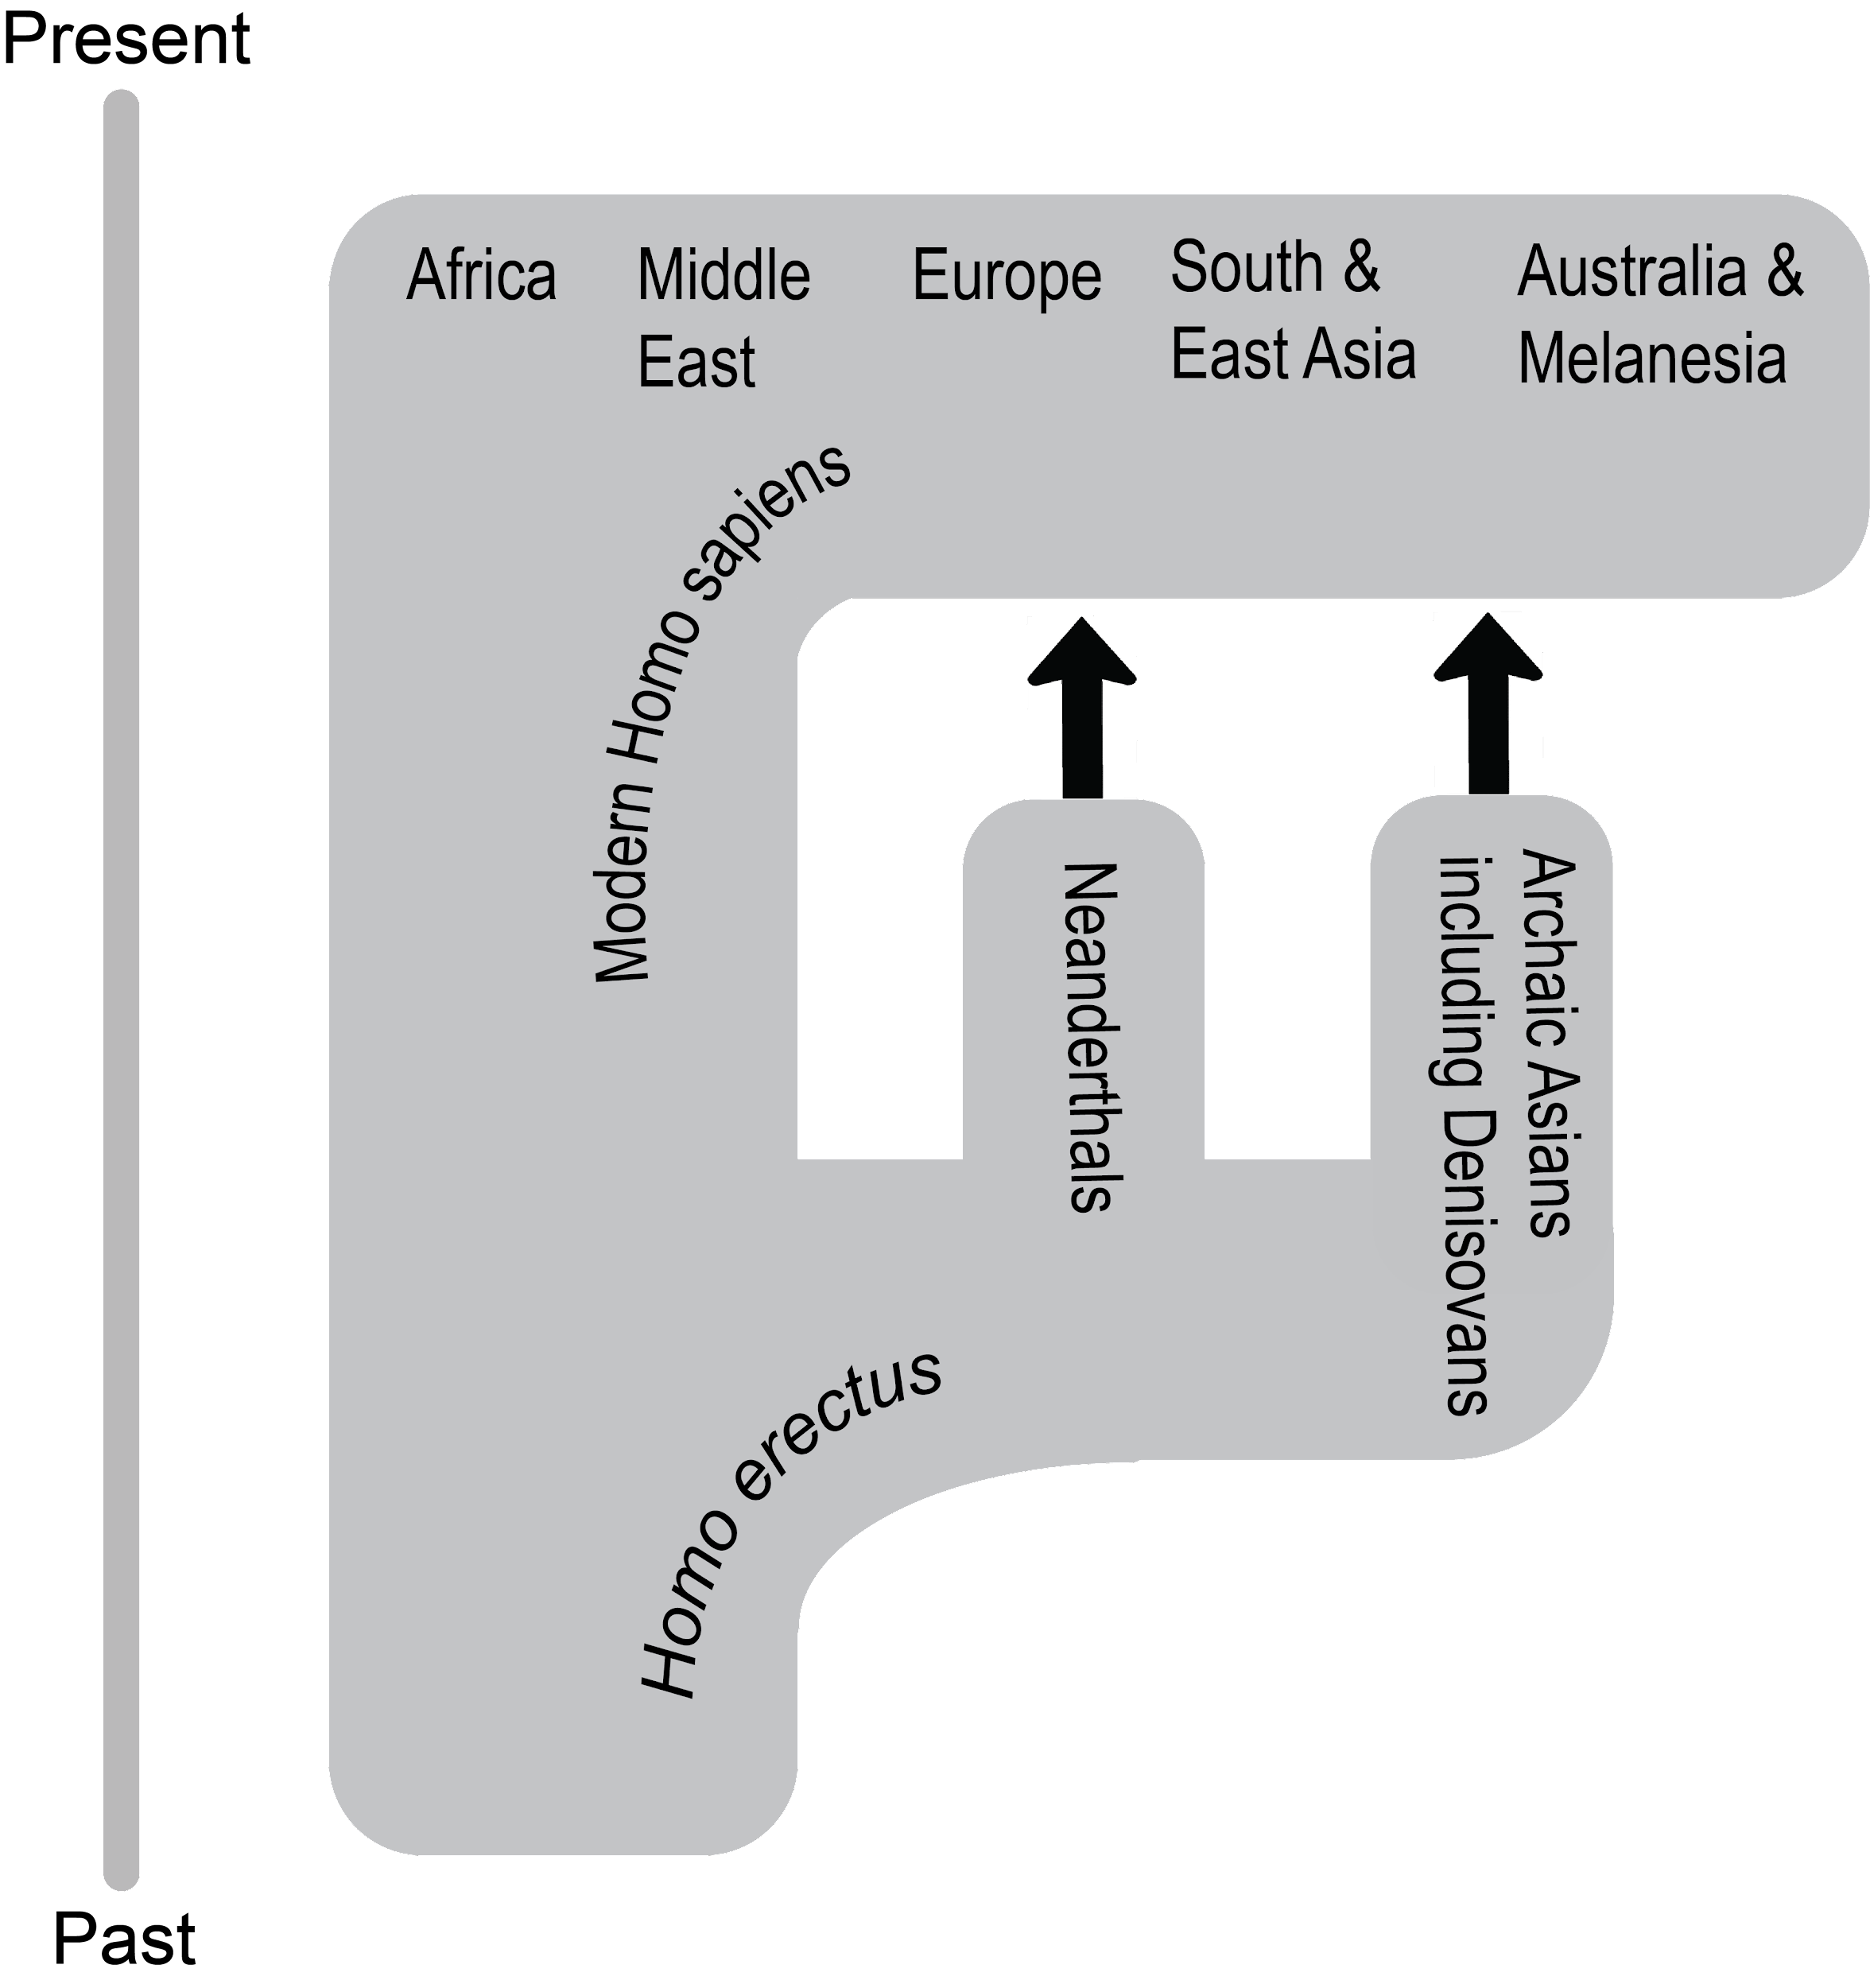 African Homo erectus expands and gives rise to archaics and modern Homo sapiens groups.